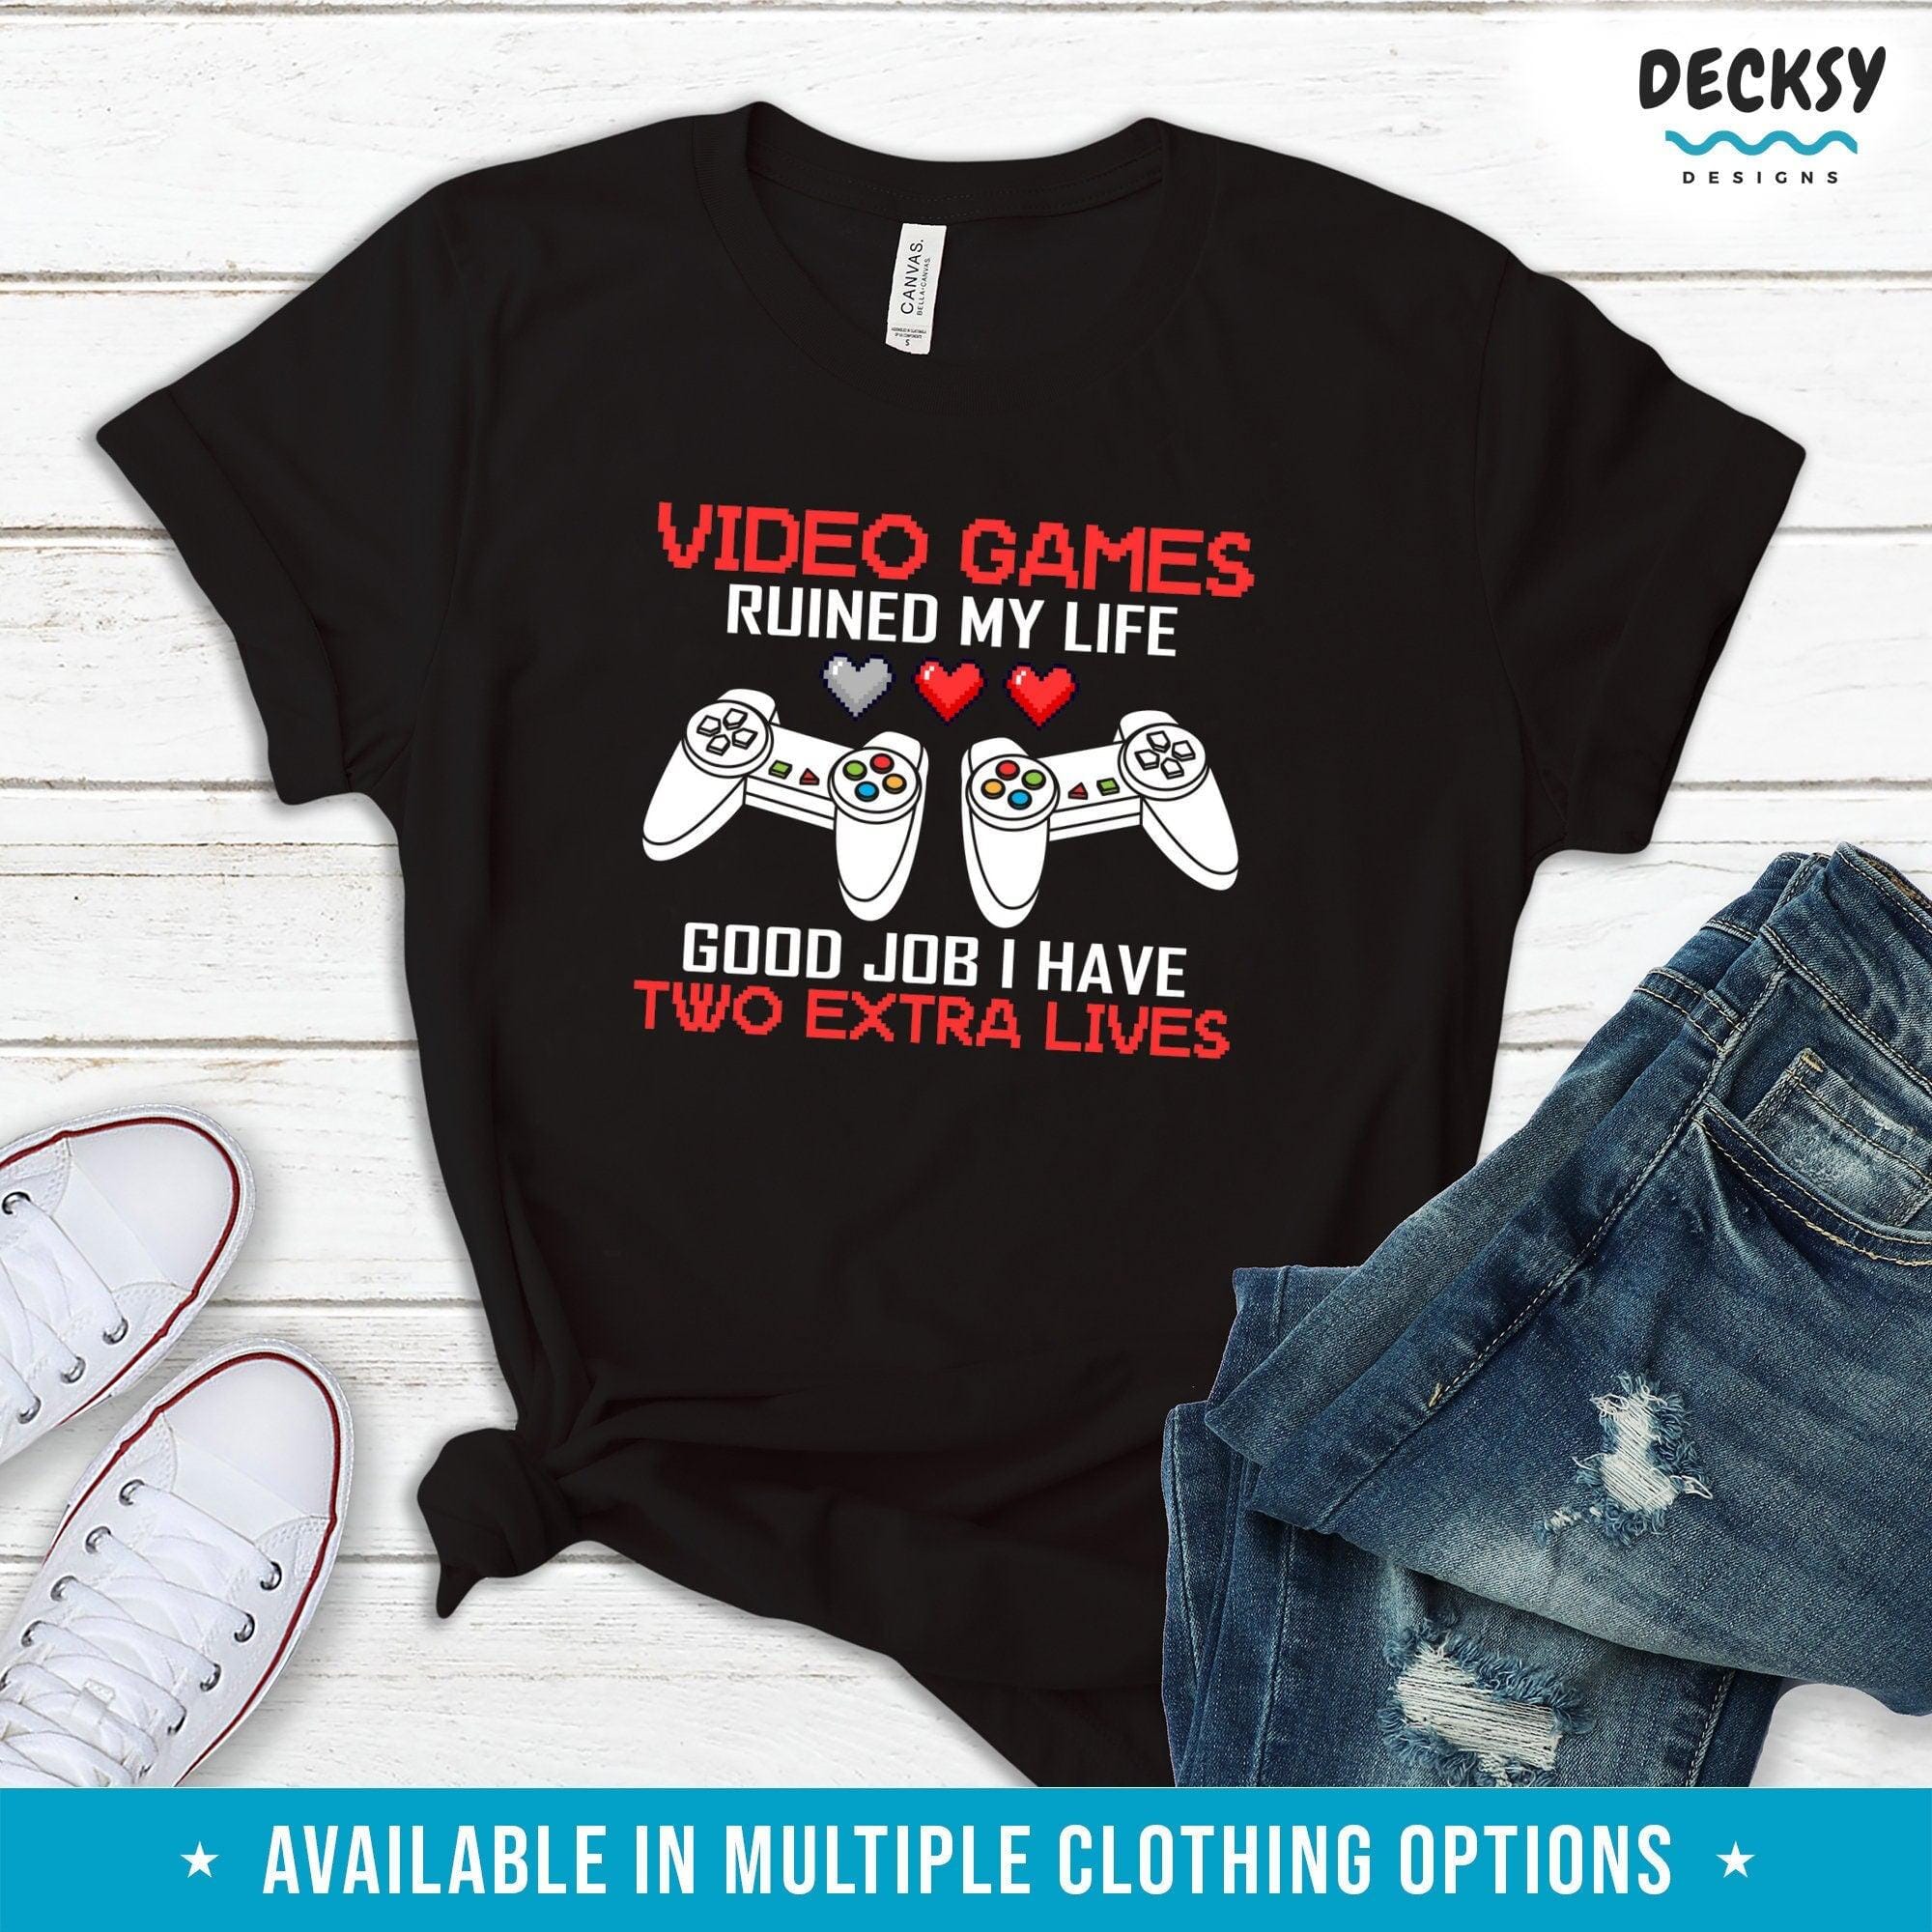 Gamer Shirt, Video Game Gift-Clothing:Gender-Neutral Adult Clothing:Tops & Tees:T-shirts:Graphic Tees-DecksyDesigns